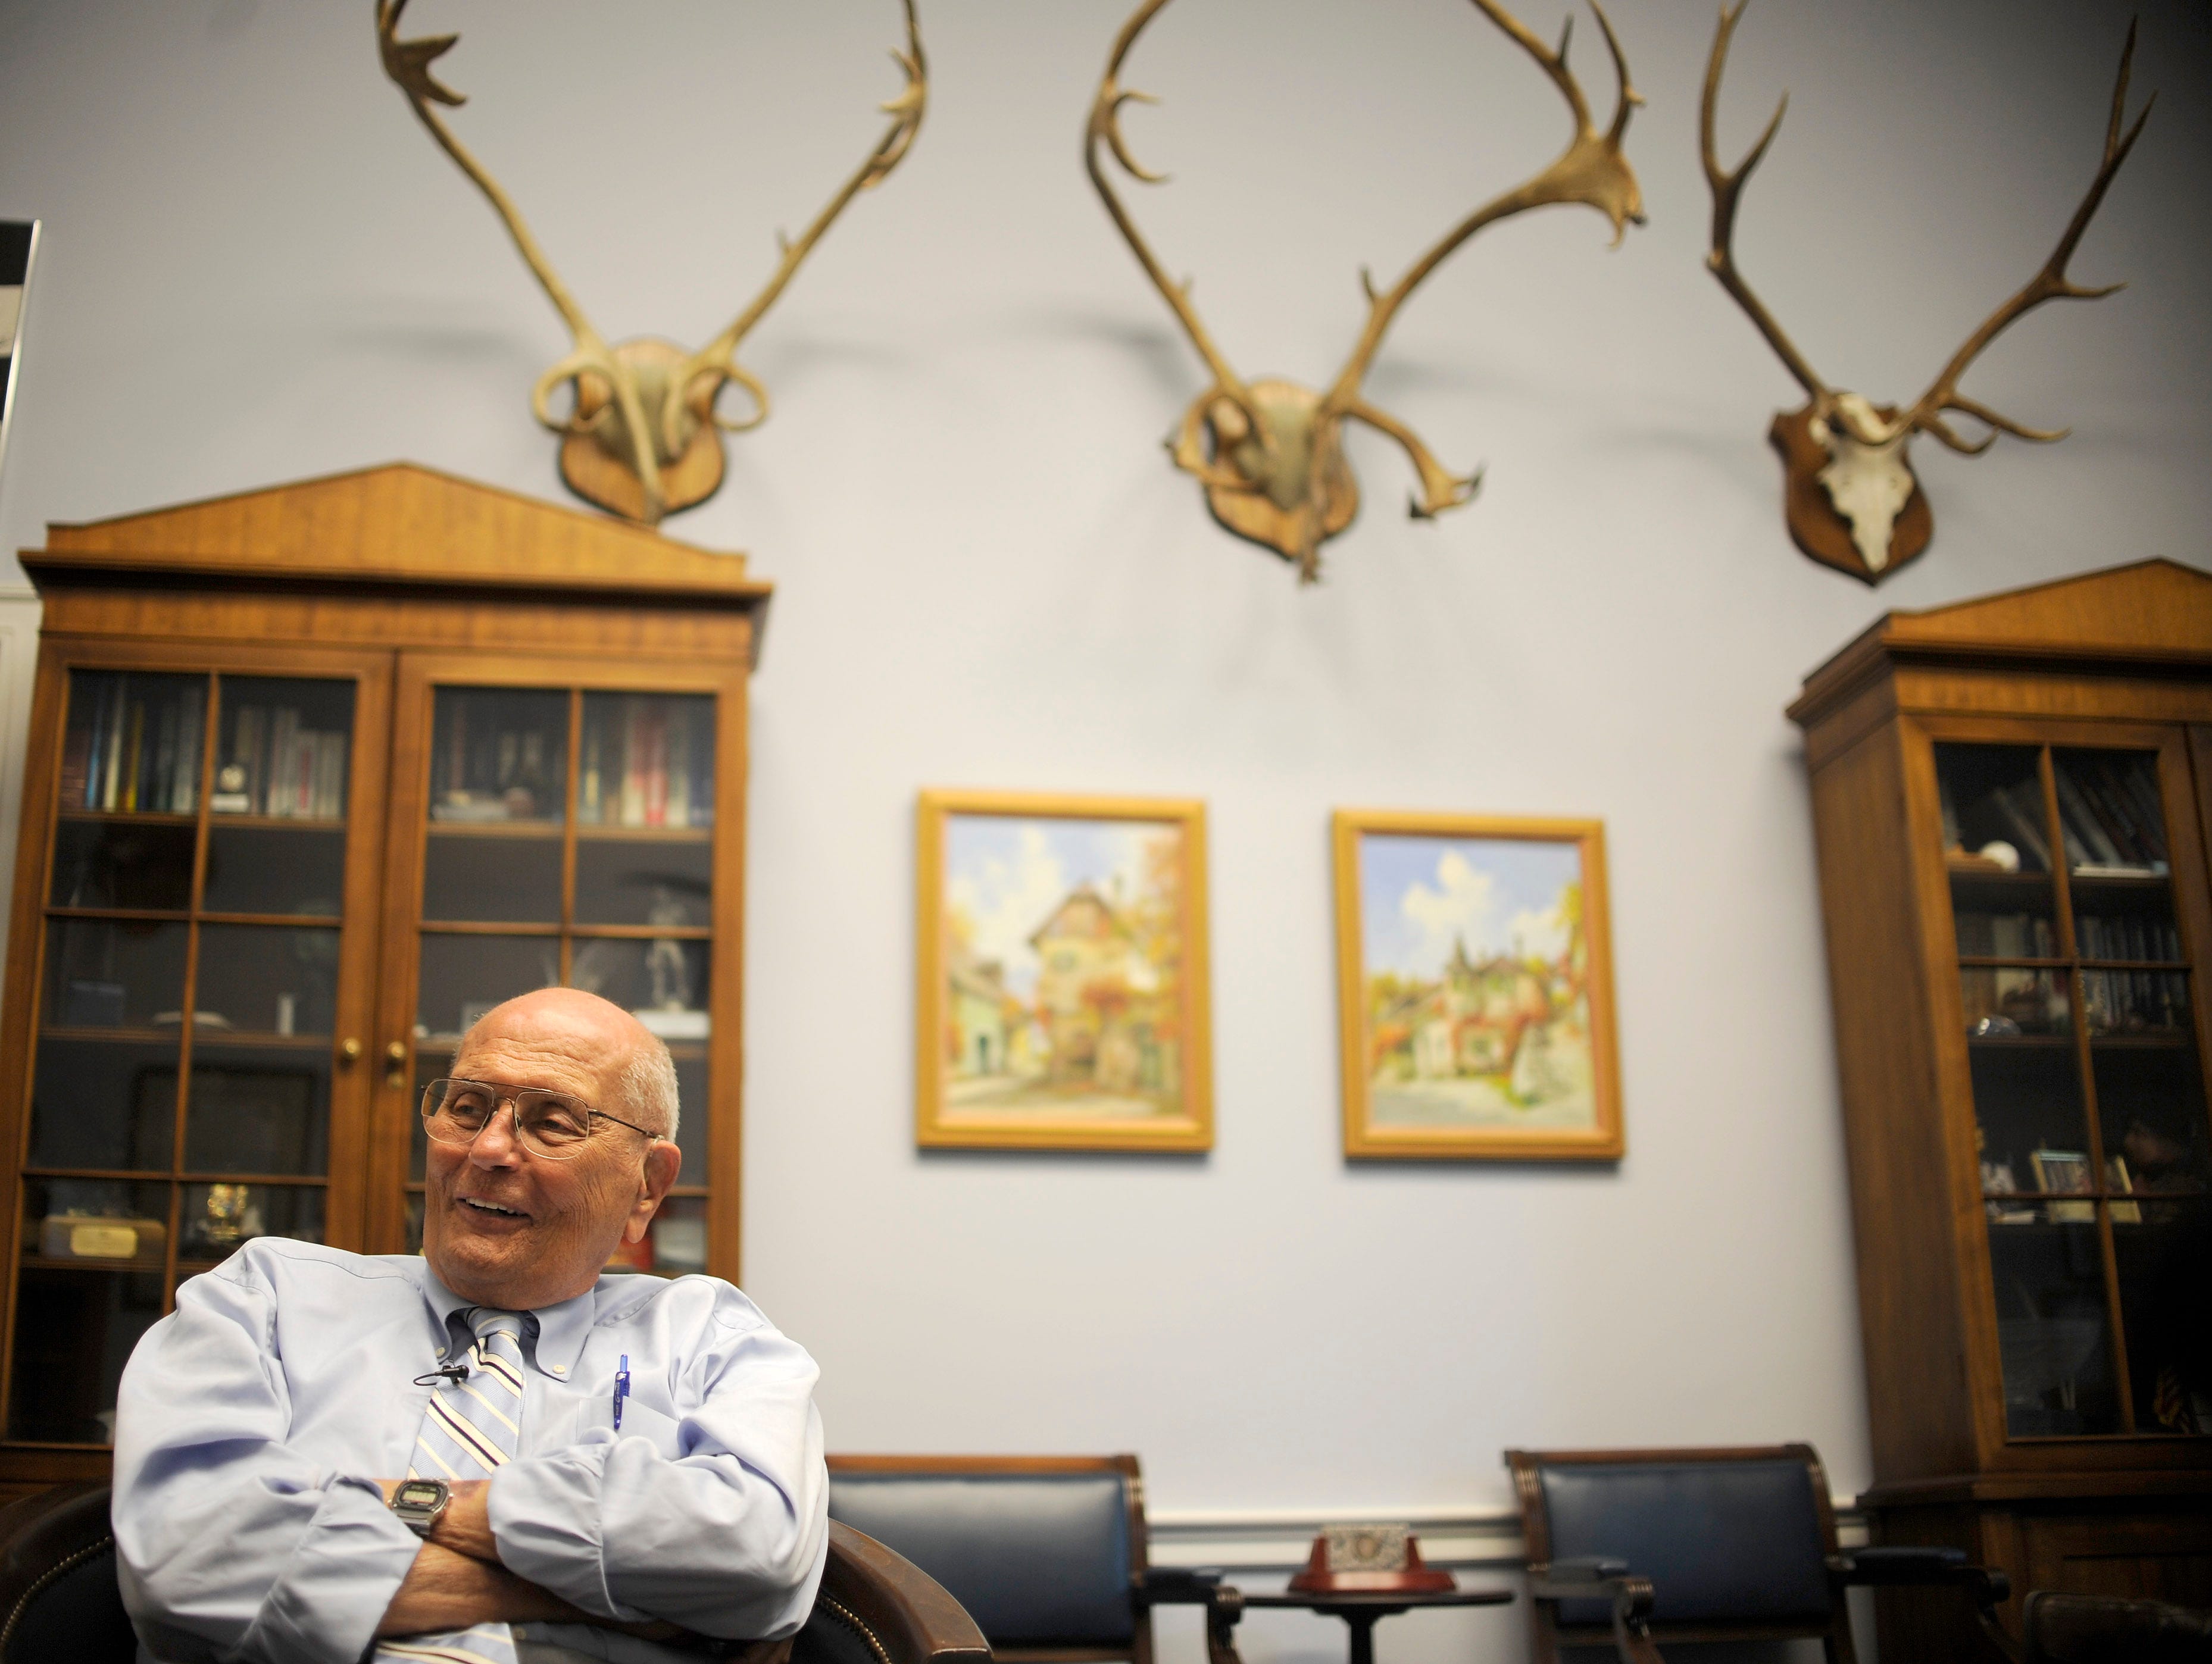 Dingell talks to The Detroit News in his office in the Rayburn Building in Washington D.C. in 2013. On June 7 of that year he became the longest serving congressman in U.S. history.